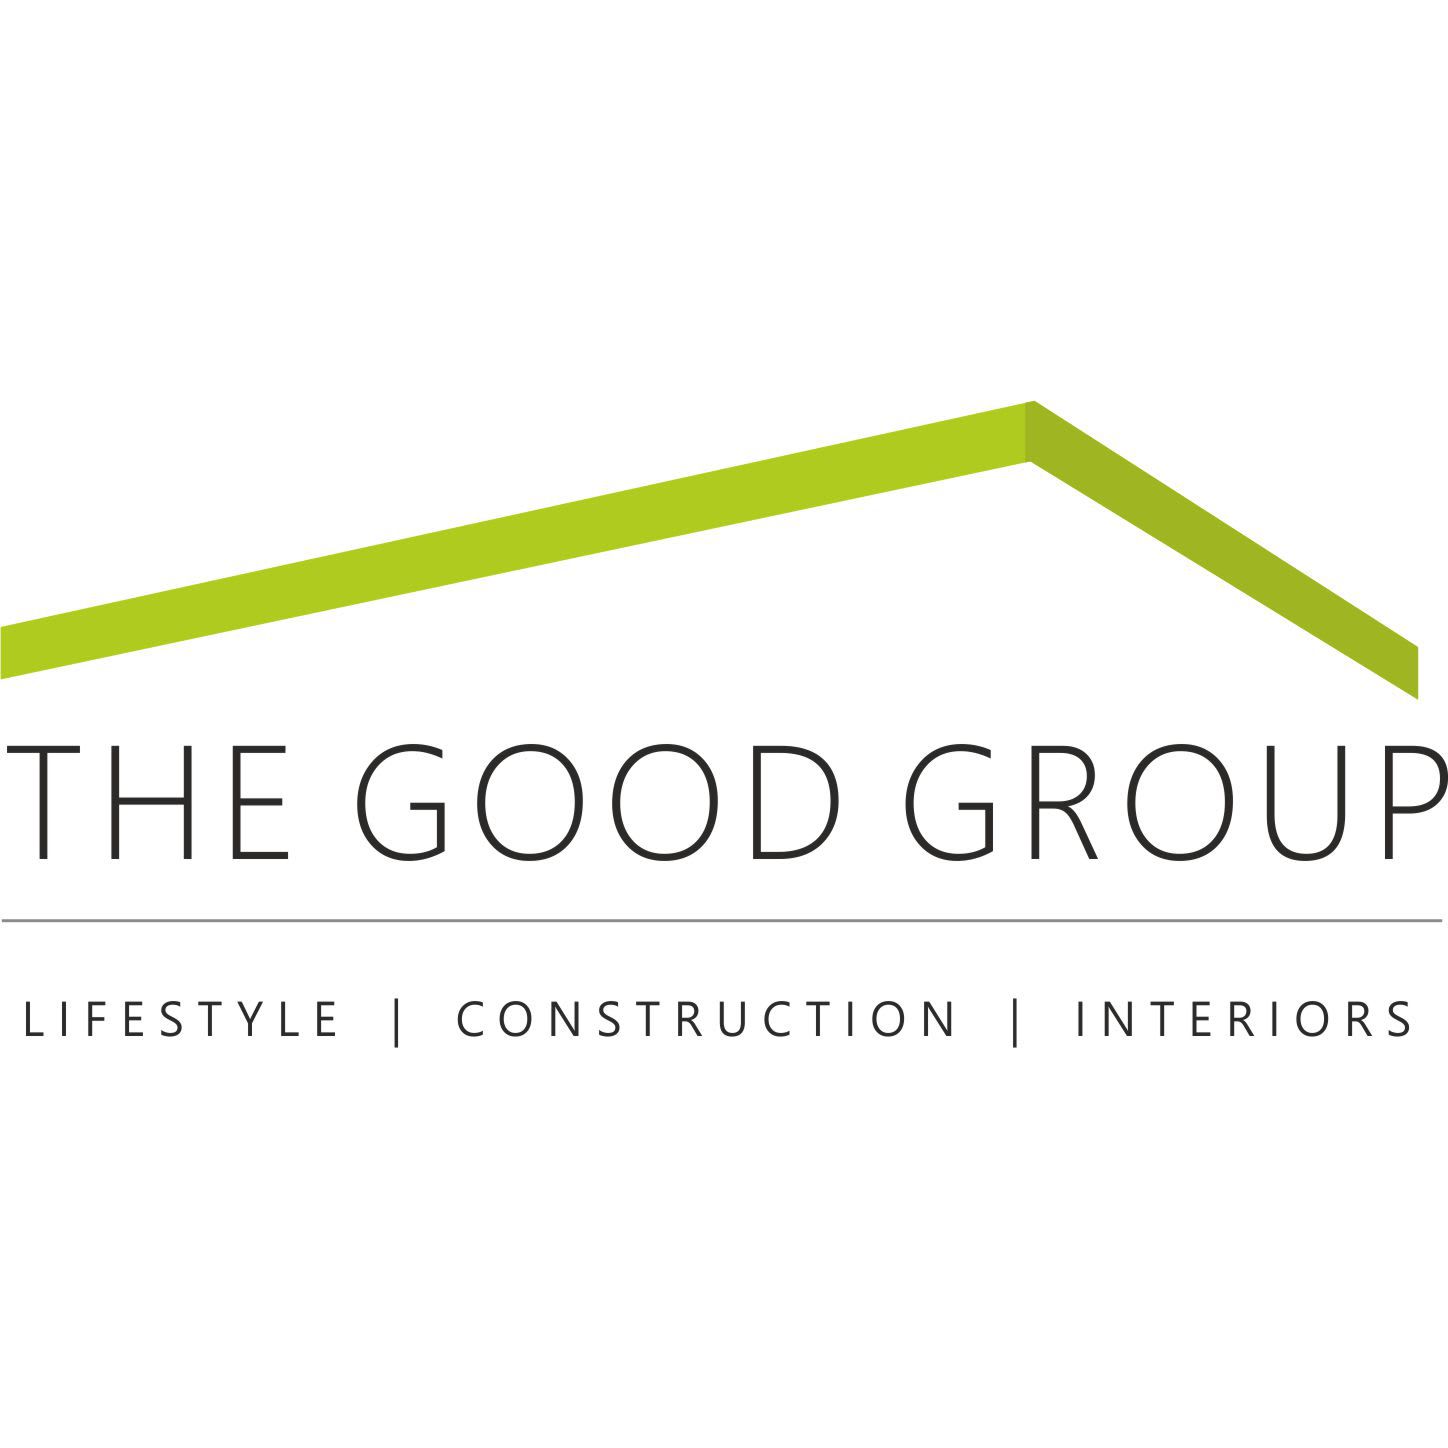 The Good Group - Cheltenham, Gloucestershire GL50 1NW - 01242 650760 | ShowMeLocal.com